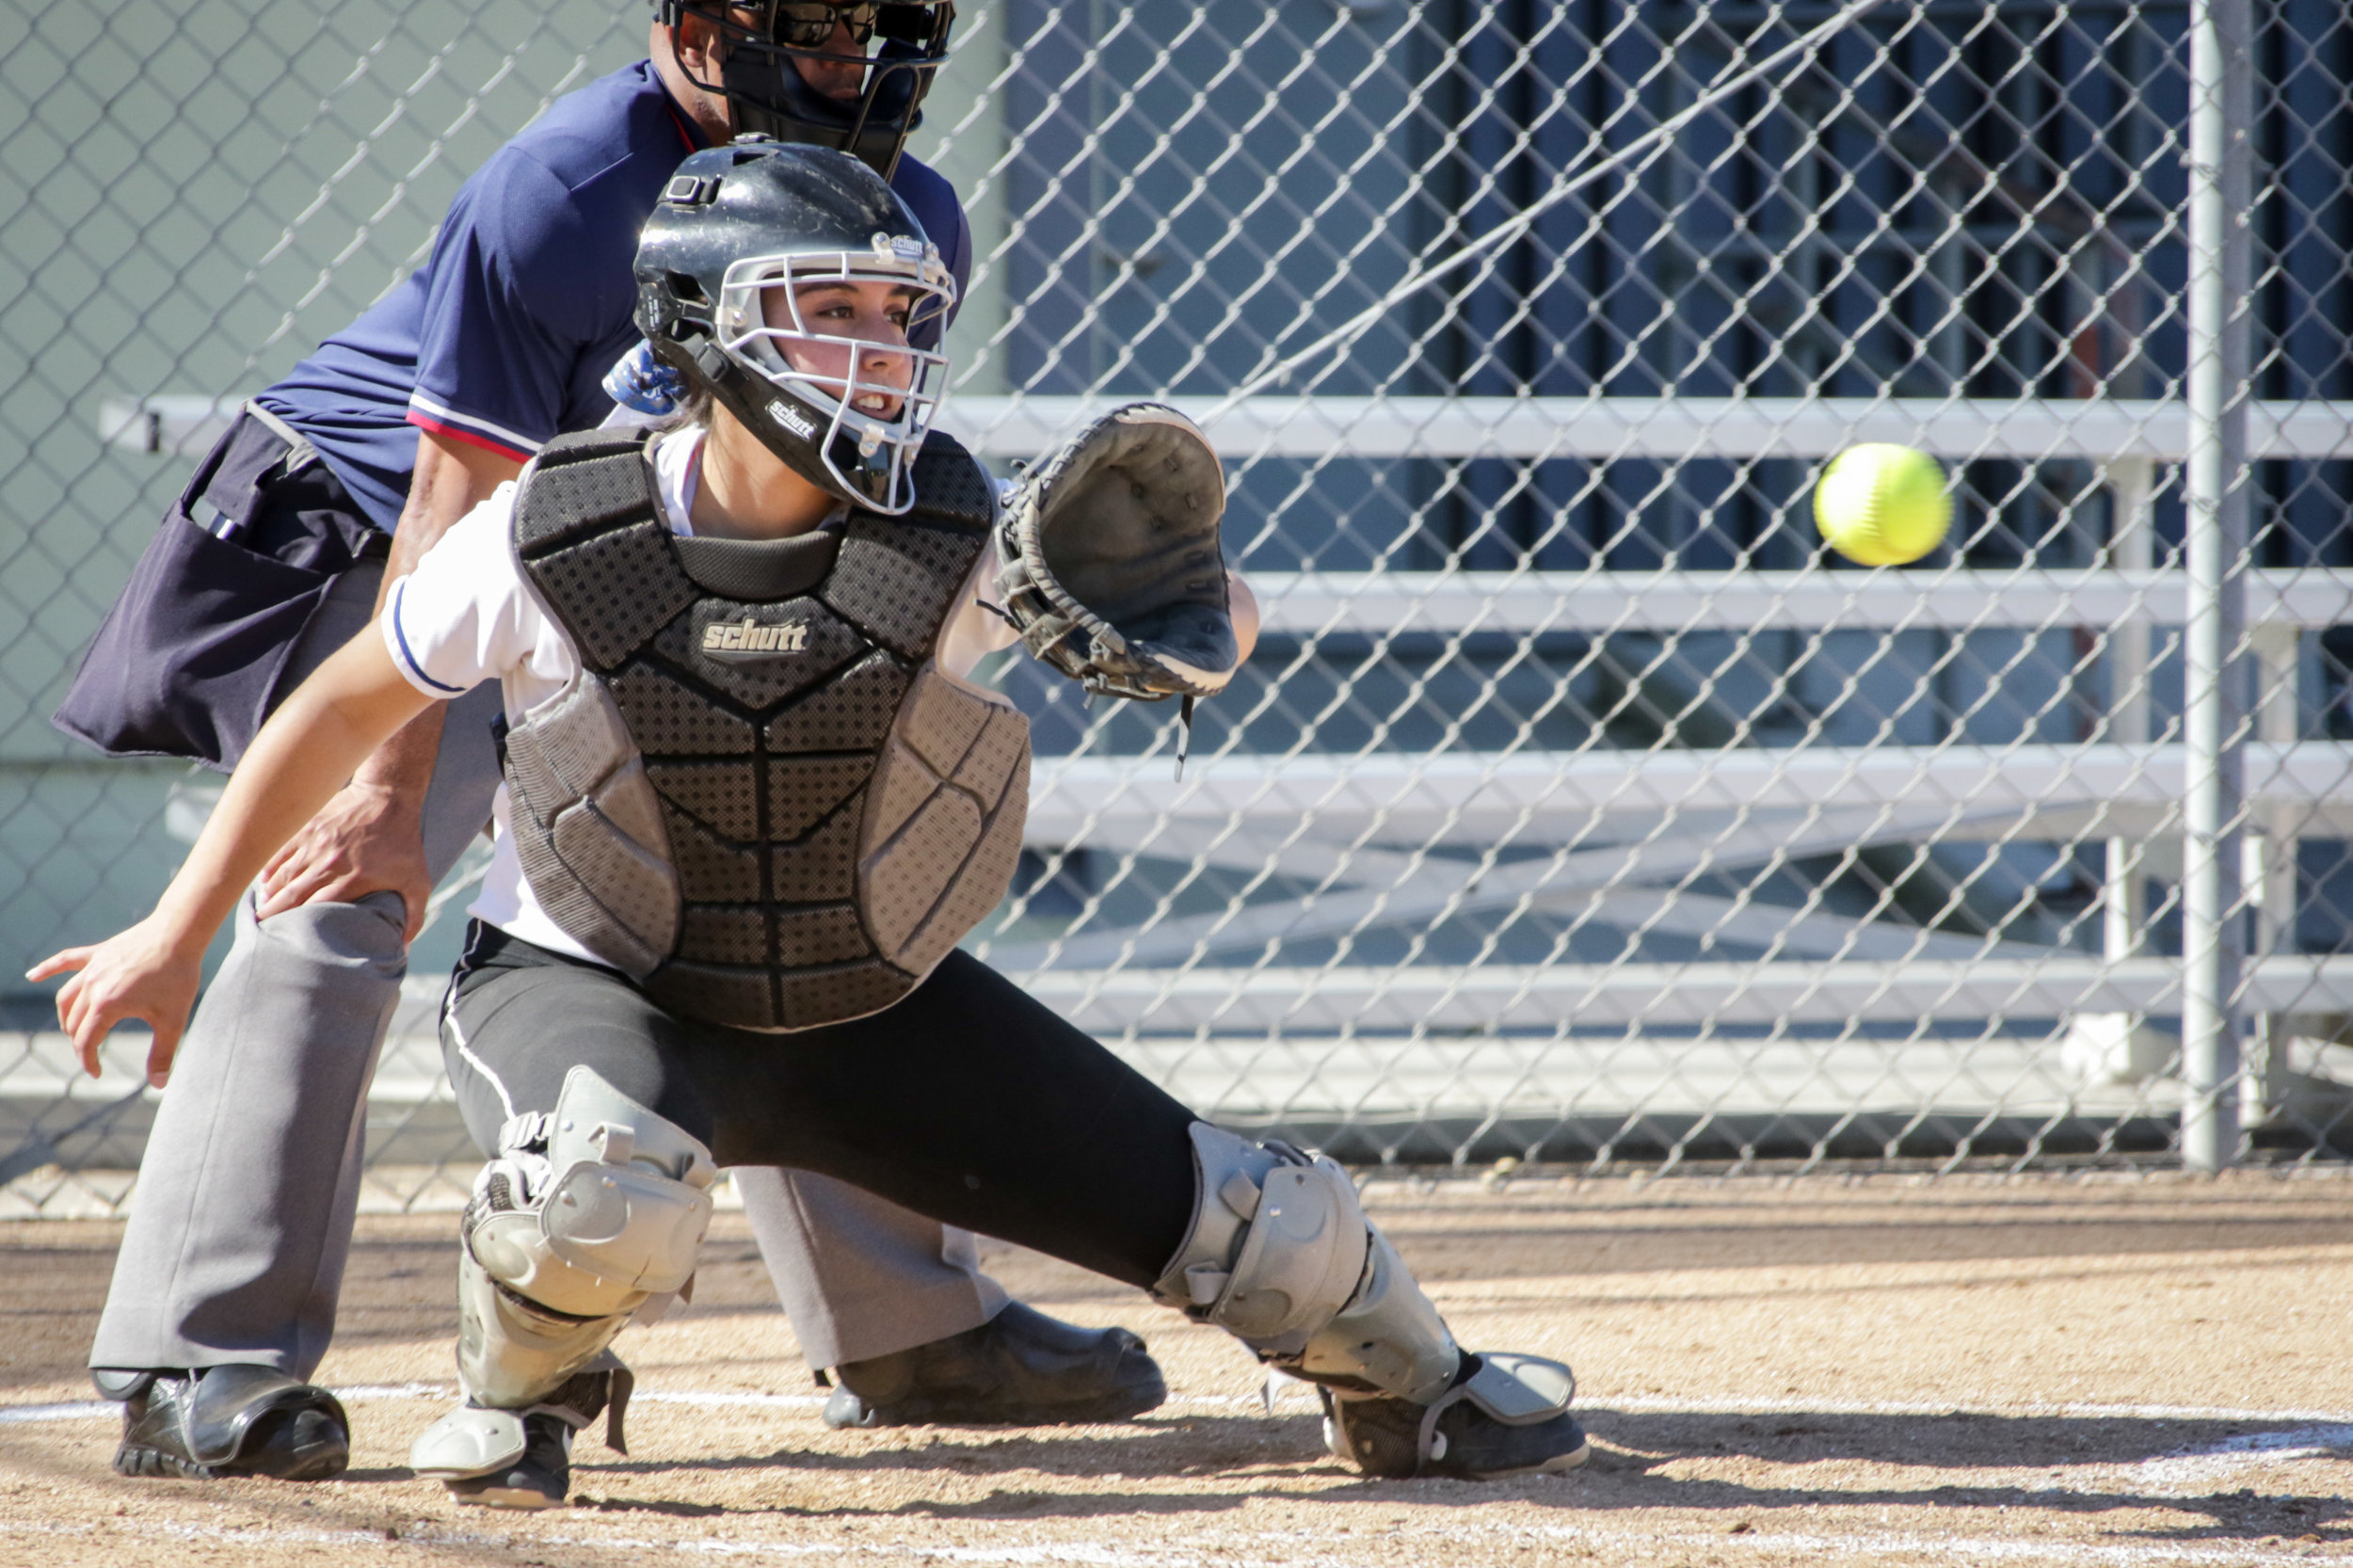  Santa Monica College Corsair softball team catcher Sam Soto (Right) attempts to catch a strike ball during their game against Allan Hancock College on Tuesday, March 27th, 2018. The game ended 8-1 in favor for Allan Hancock College. (Santa Monica, C